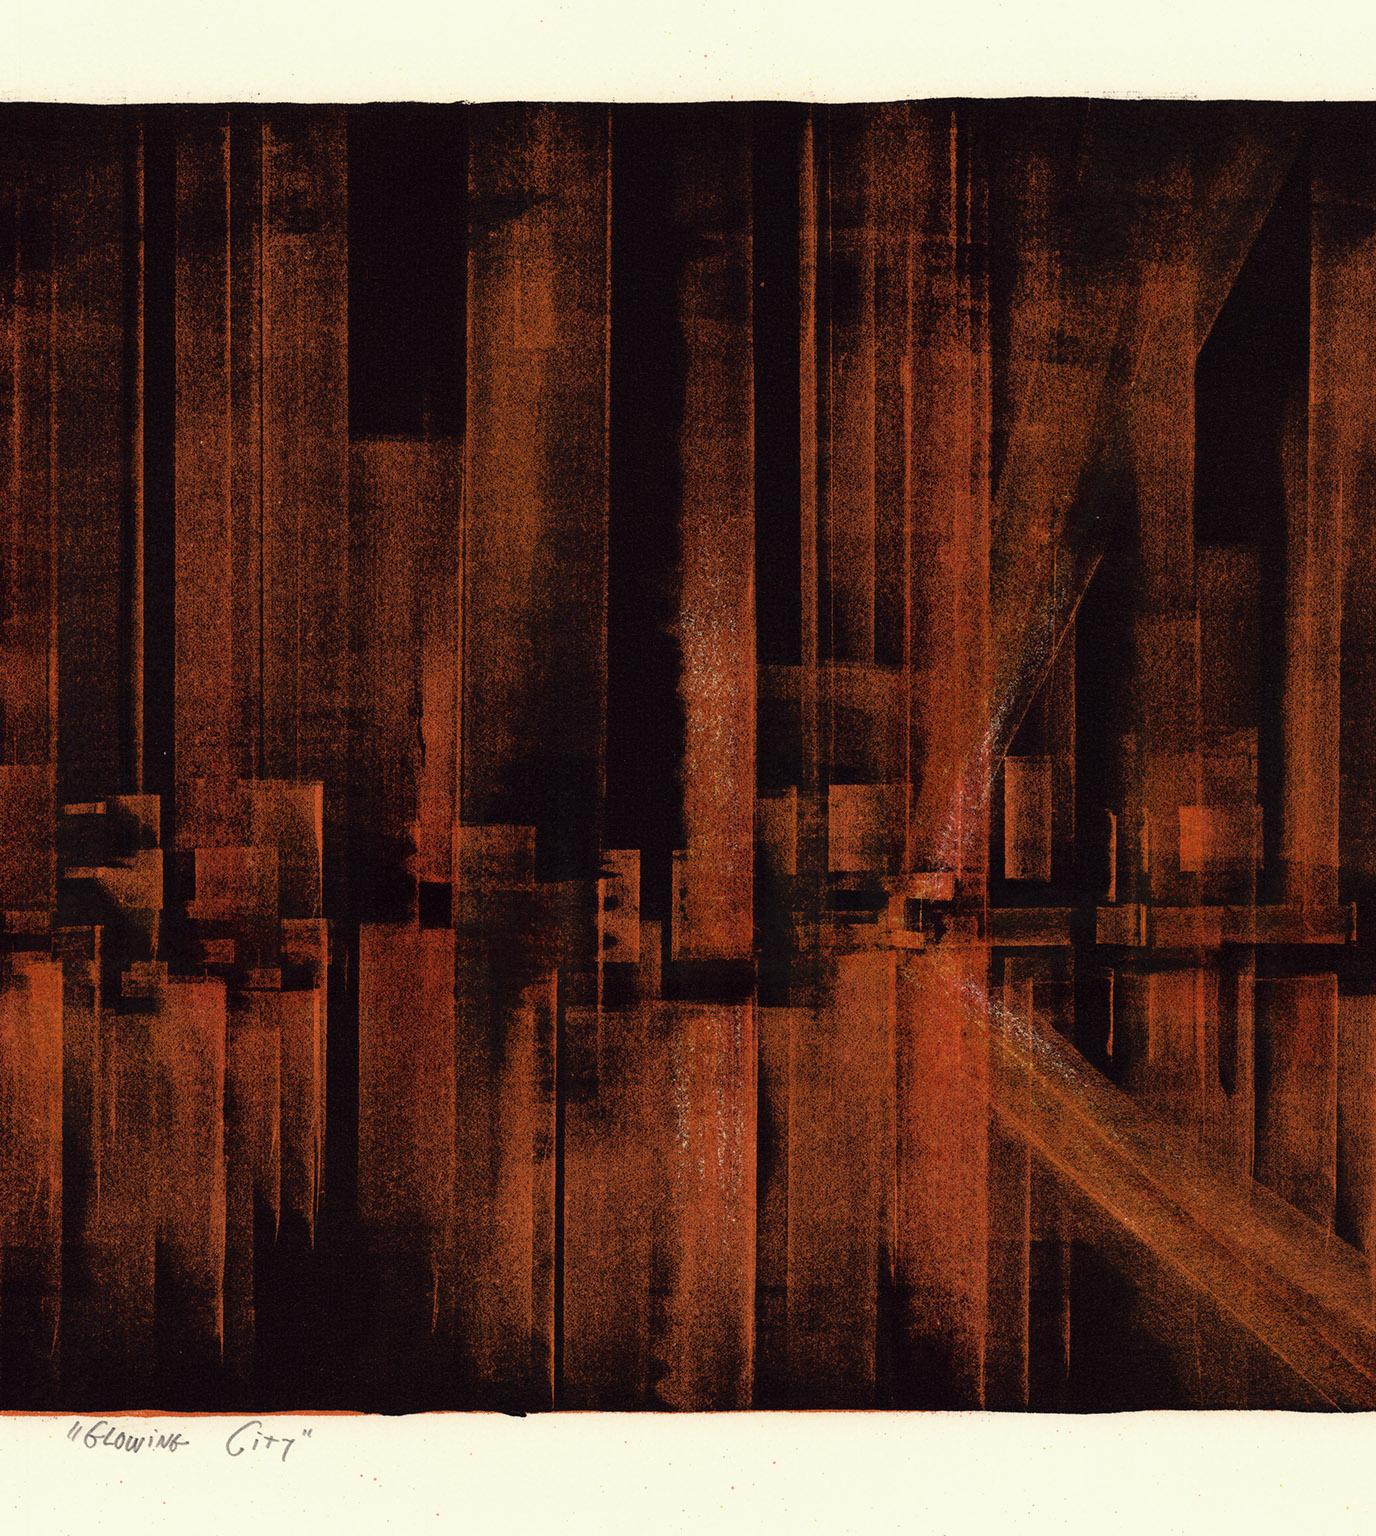 Richard Florsheim created this color lithograph entitled “Glowing City” in 1969 in an edition of 250 pieces. Published by Associated American Artists and printed by Mourlot Press, Paris, this impression is signed and inscribed “Artist Proof.” It is